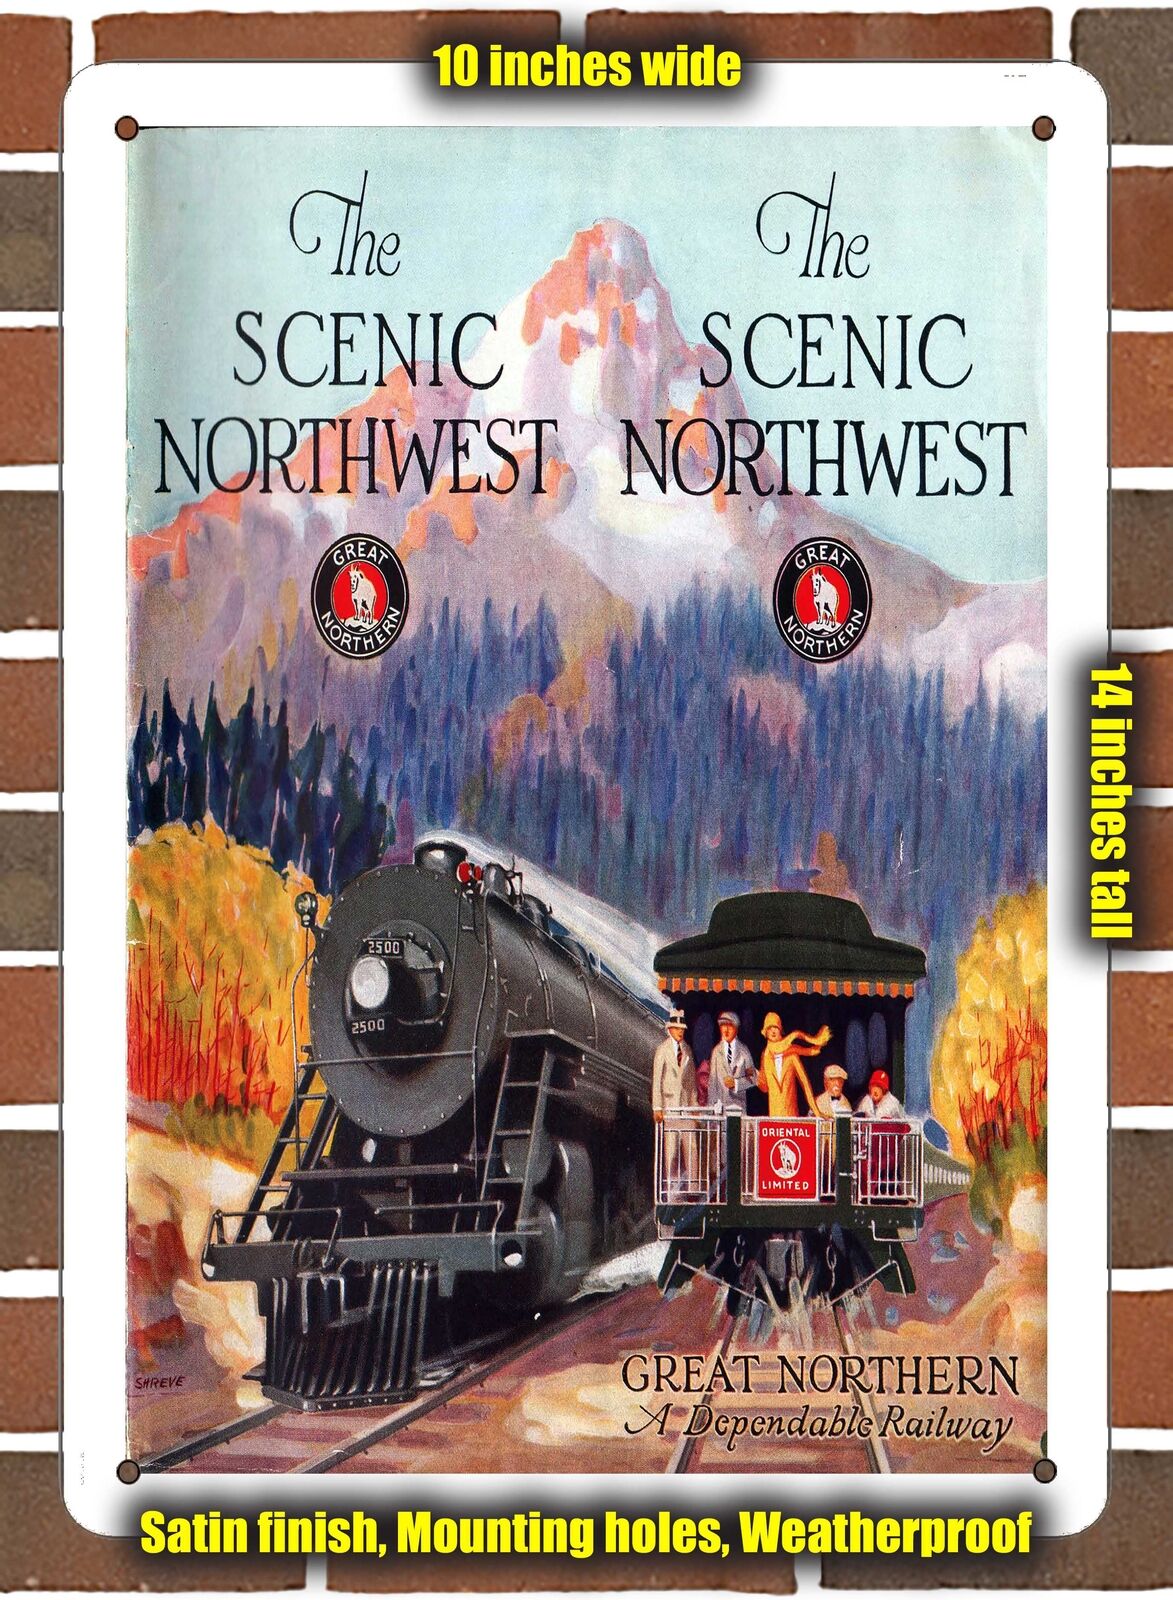 METAL SIGN - 1927 Great Northern Scenic Northwest - 10x14 inches